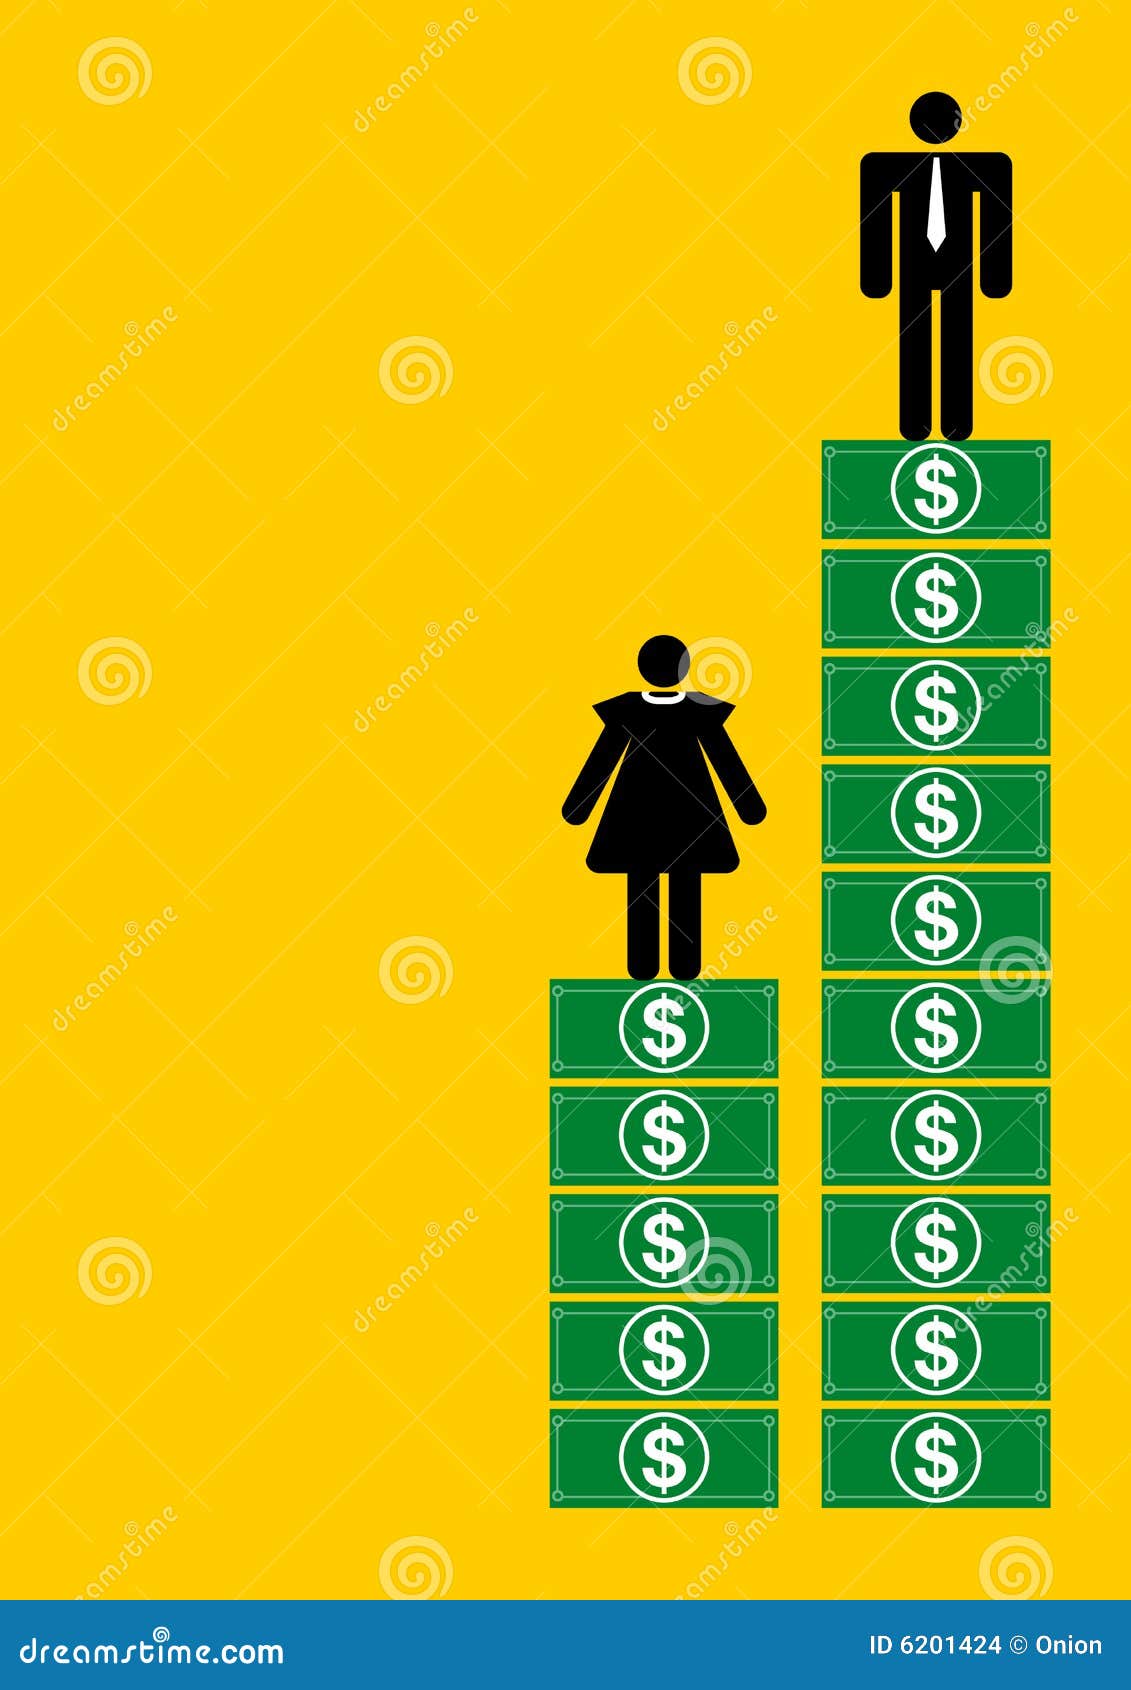 unfair salary scale for women